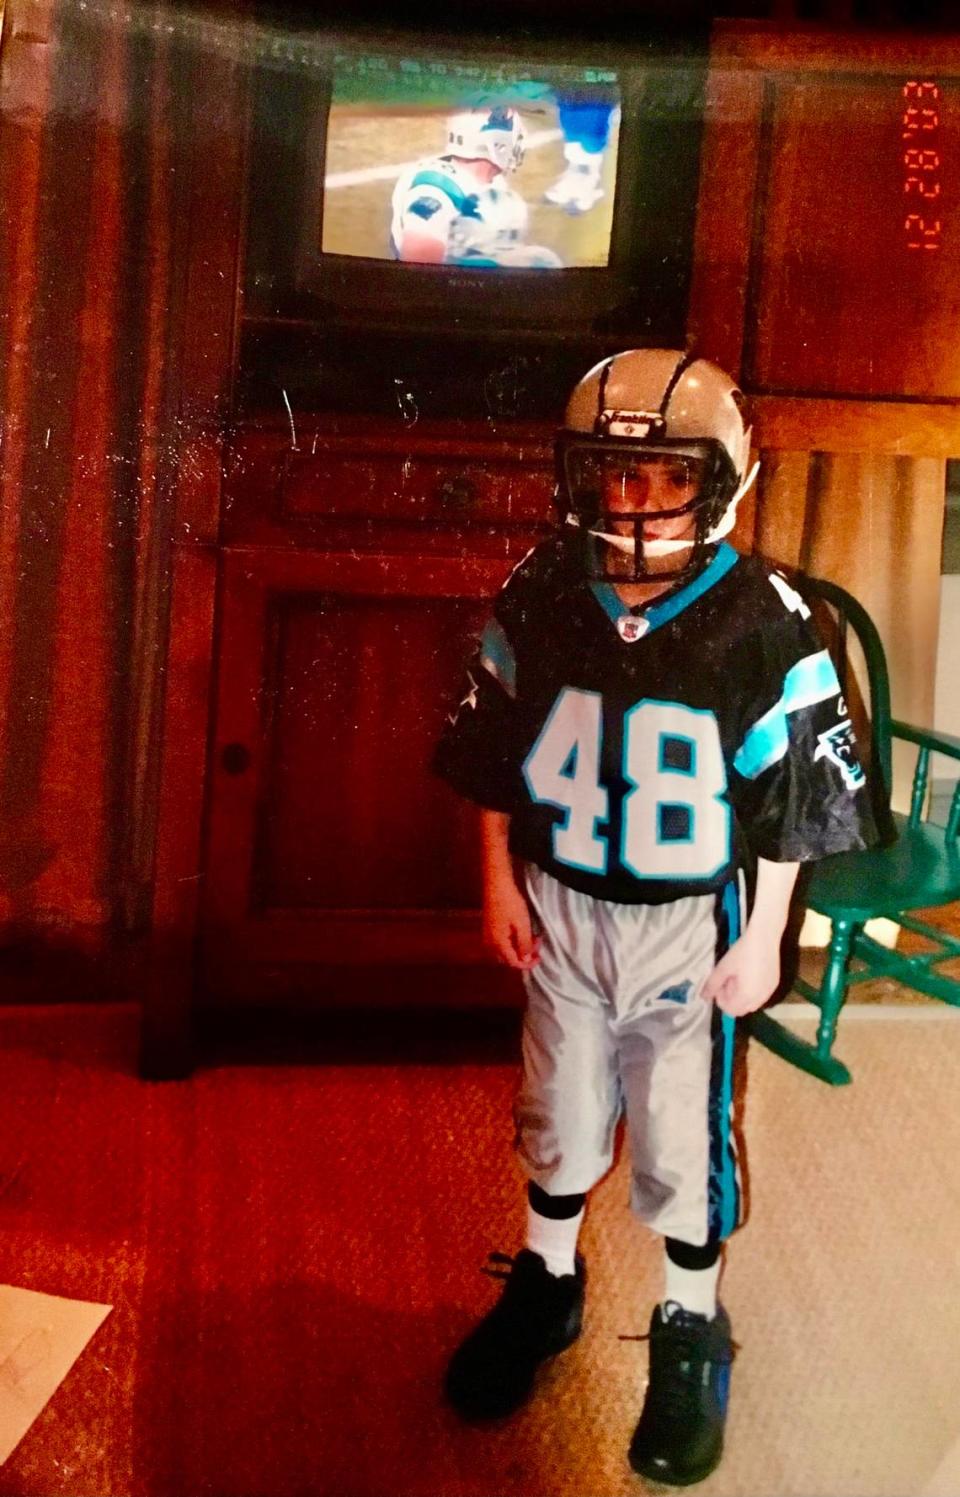 Daniel Jones, now the quarterback for the N.Y. Giants, grew up in Charlotte and was a big Carolina Panther fan who owned several Panther jerseys over the years. Among them was this jersey of former Carolina running back Stephen Davis, who was one of the team’s stars during the Panthers’ first Super Bowl run in 2003. Daniel Jones was six years old at the time of this photo.